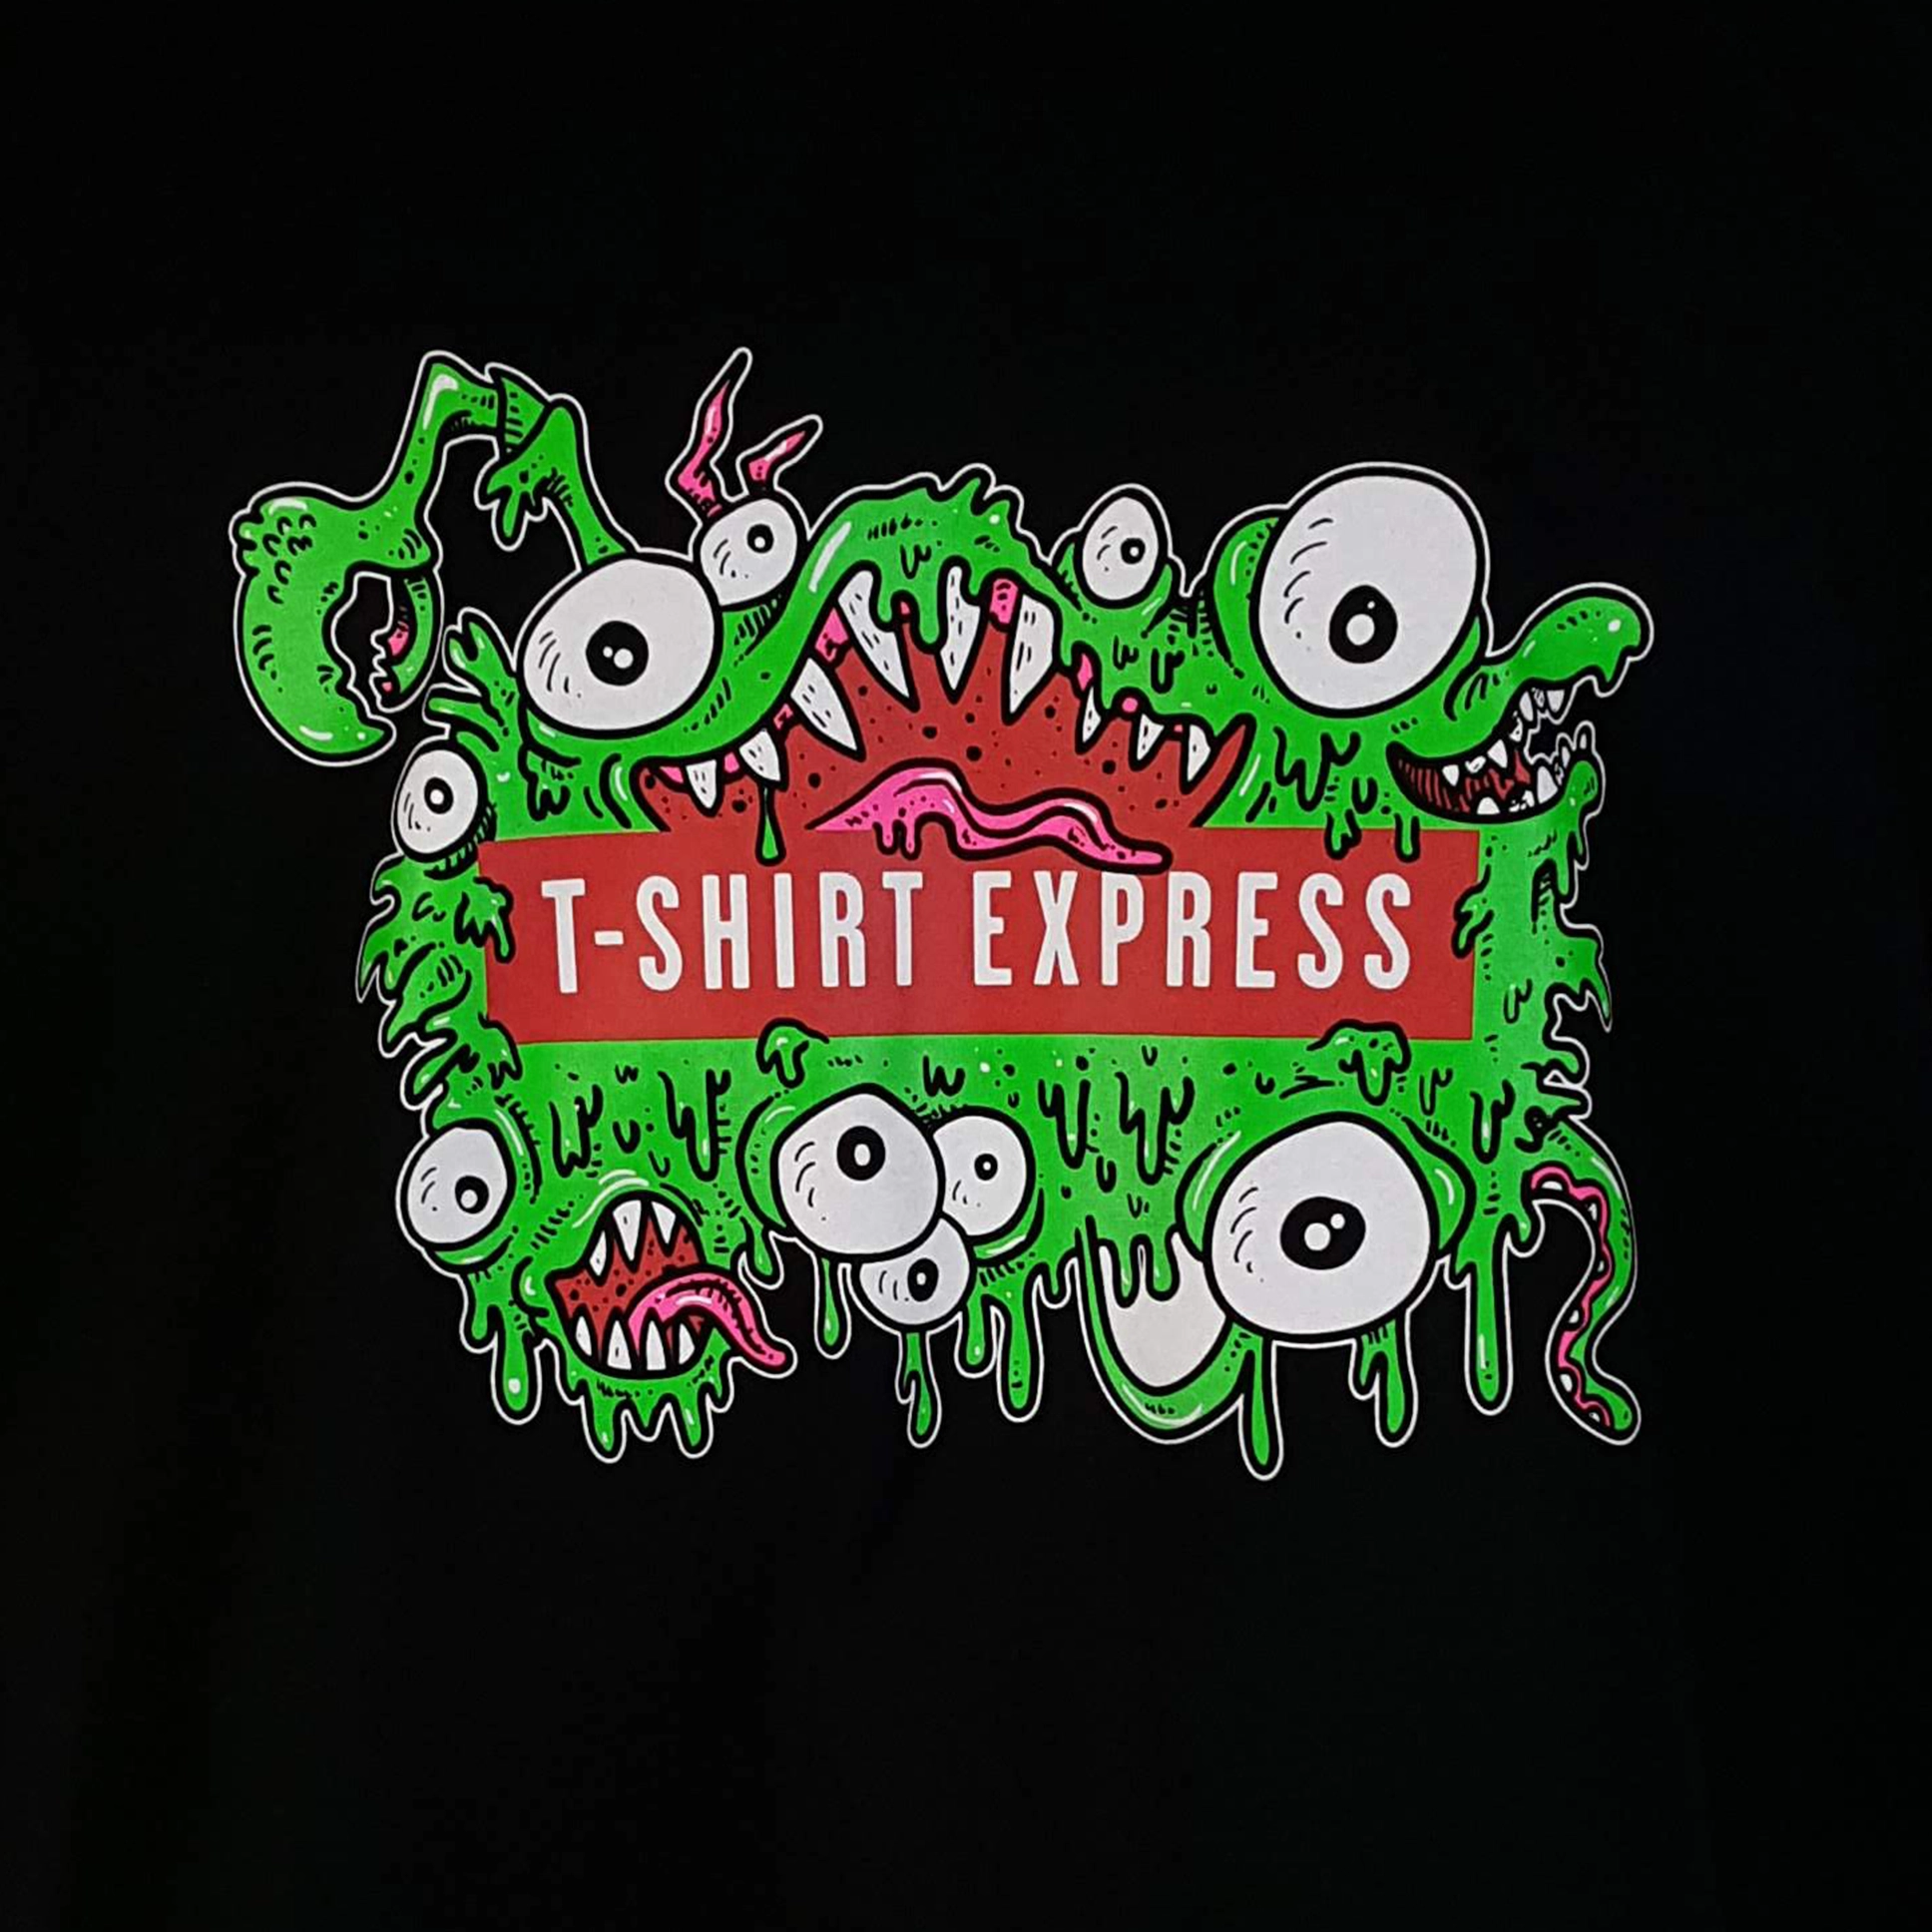 t-shirt express in New Bedford ohio